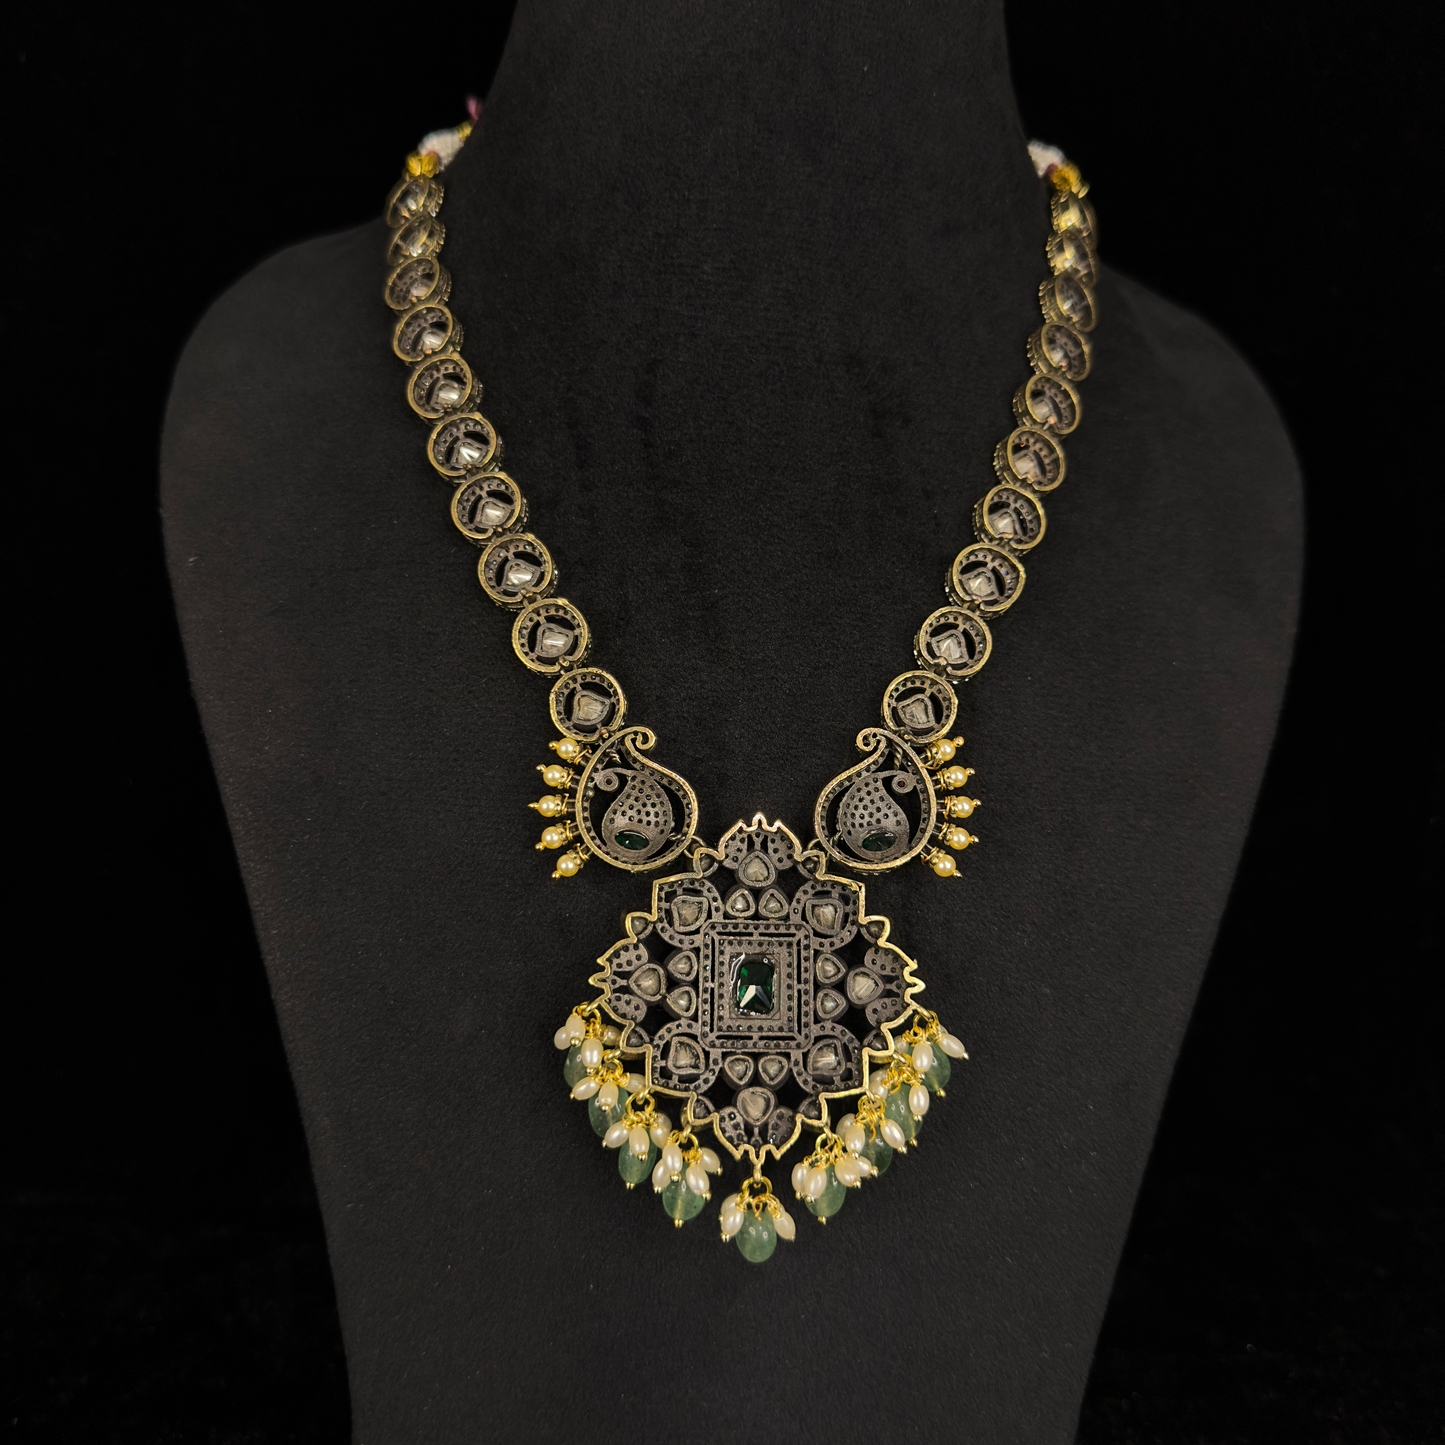 Victorian Polki Necklace with peacock motif & Earrings